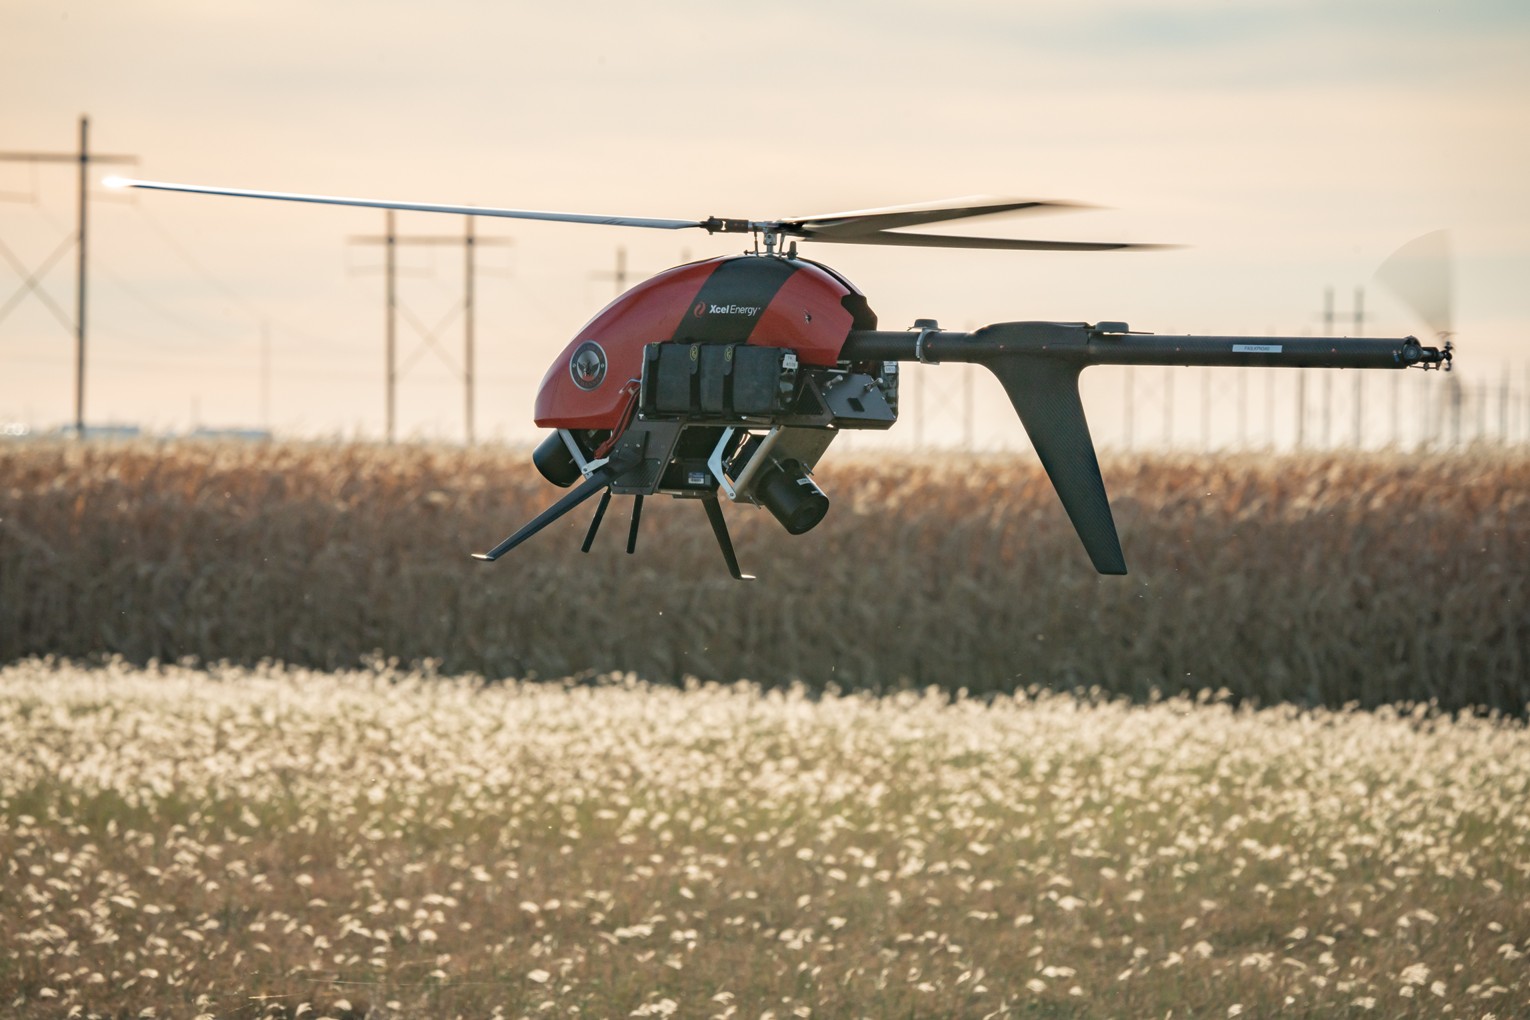 Drones equipped with imaging systems will inspect power transmission grids